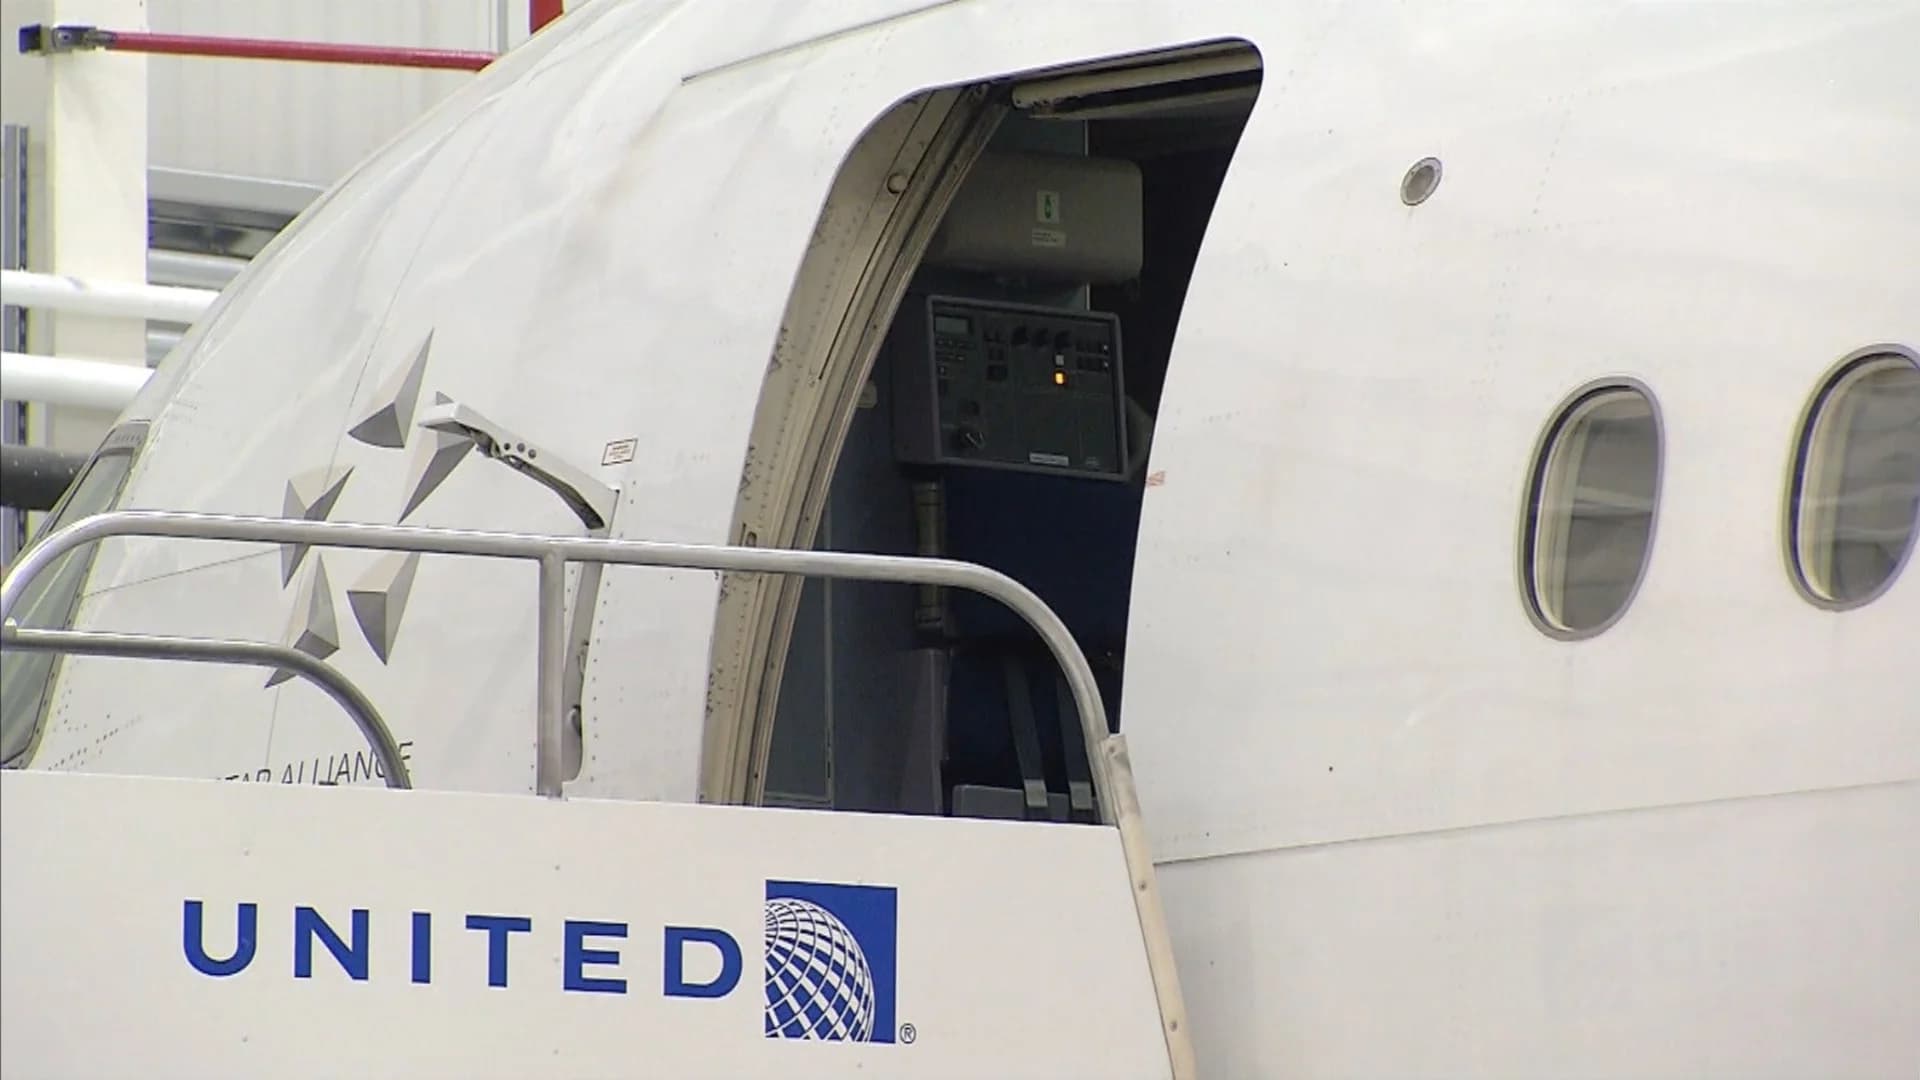 New Jersey officials want to see changes to airline practices after United overbooking incident